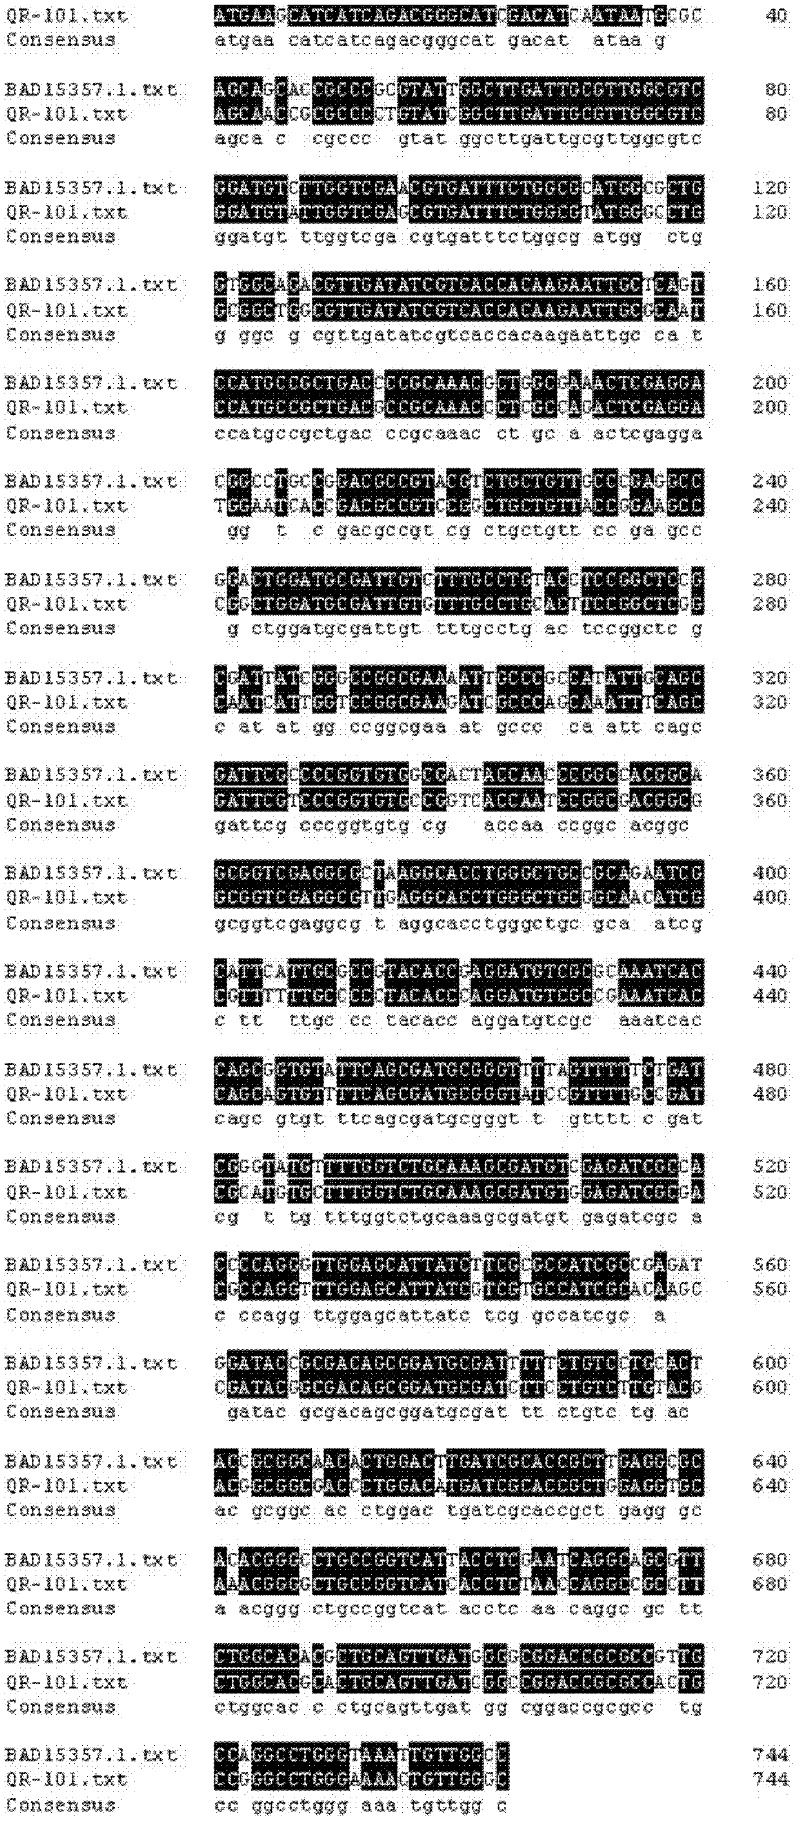 ATC racemase and coding gene thereof, and application of recombinant expression protein thereof